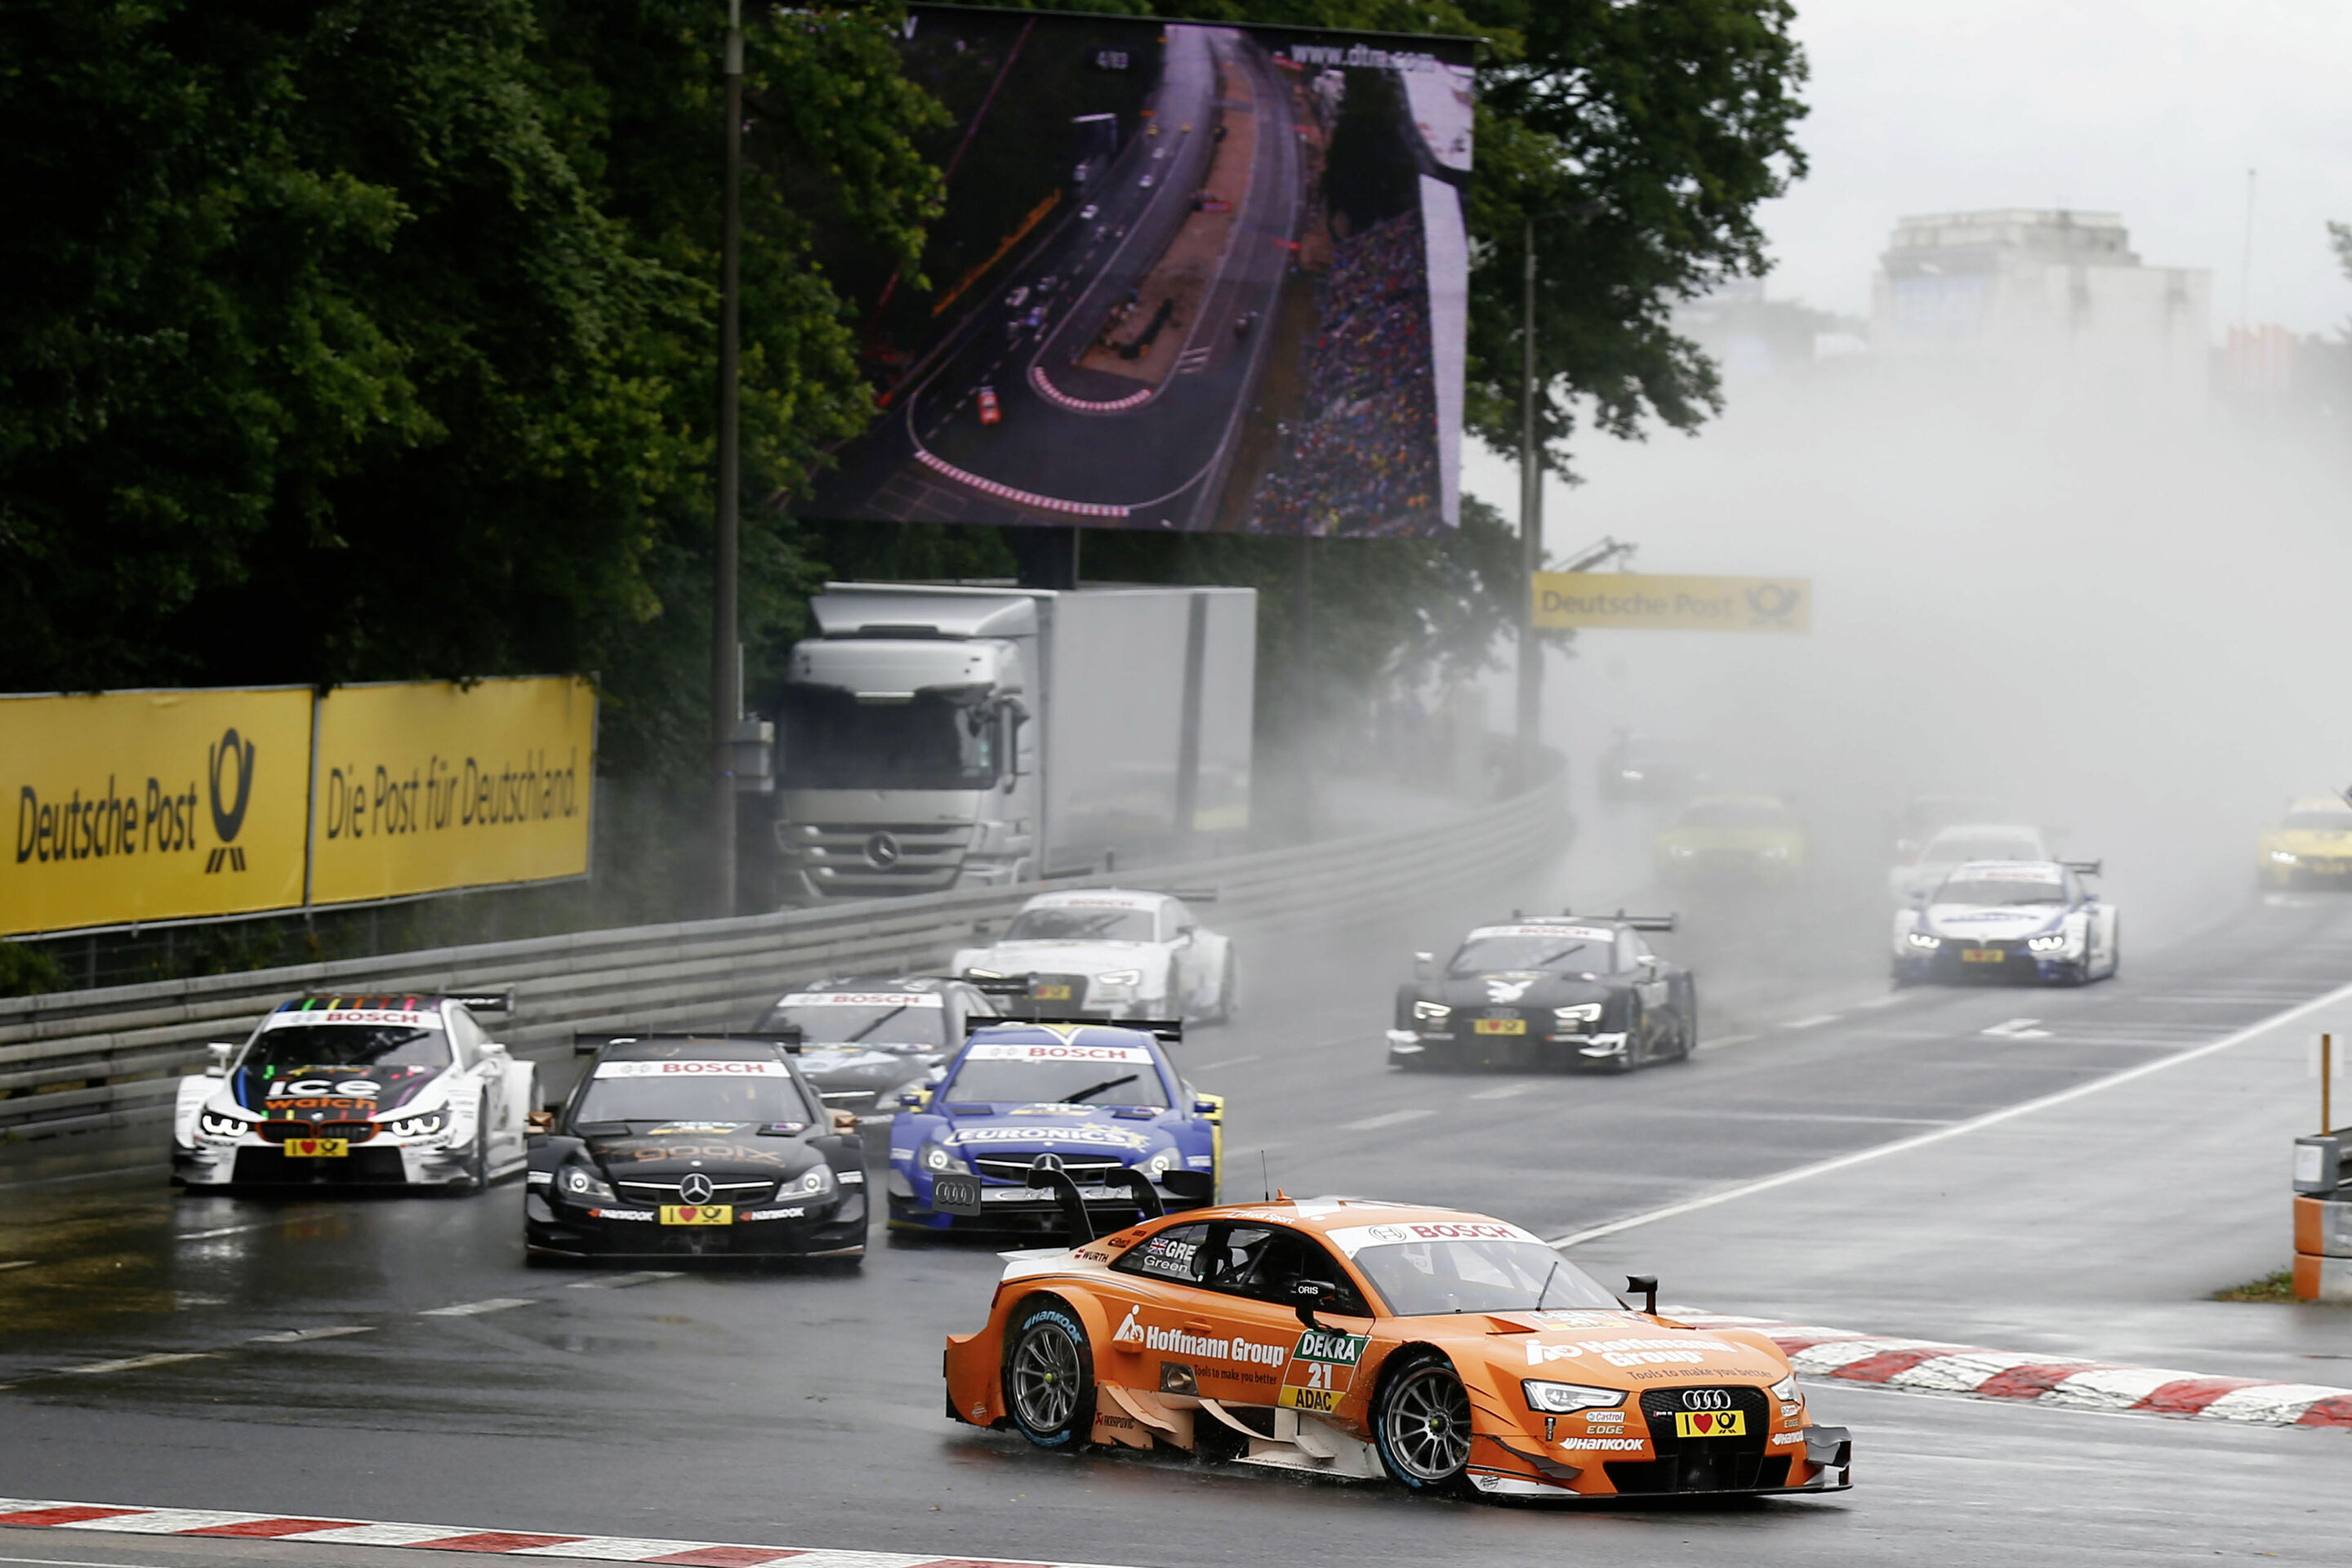 Quotes after the race at Norisring